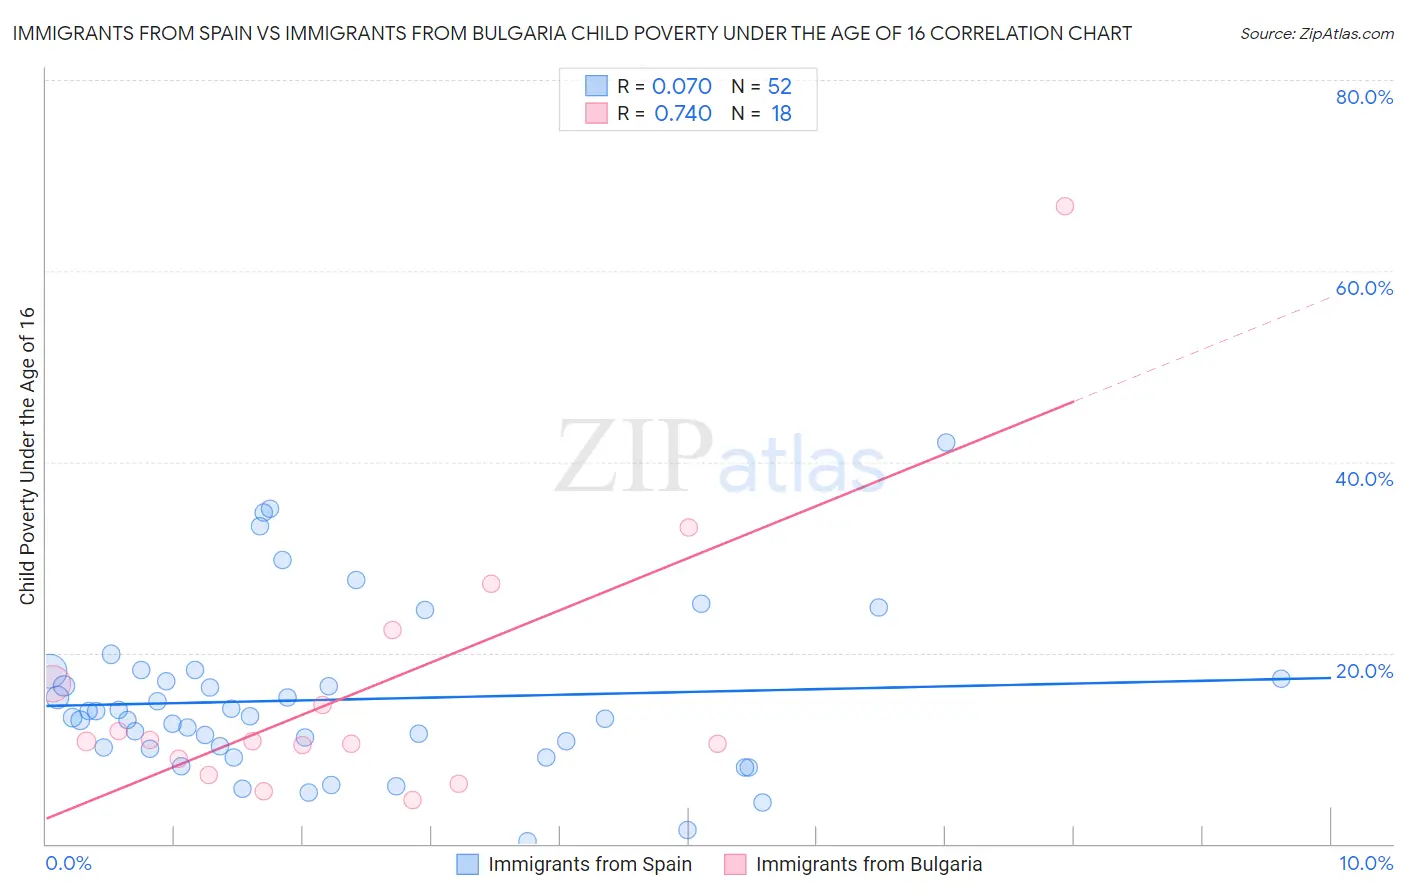 Immigrants from Spain vs Immigrants from Bulgaria Child Poverty Under the Age of 16